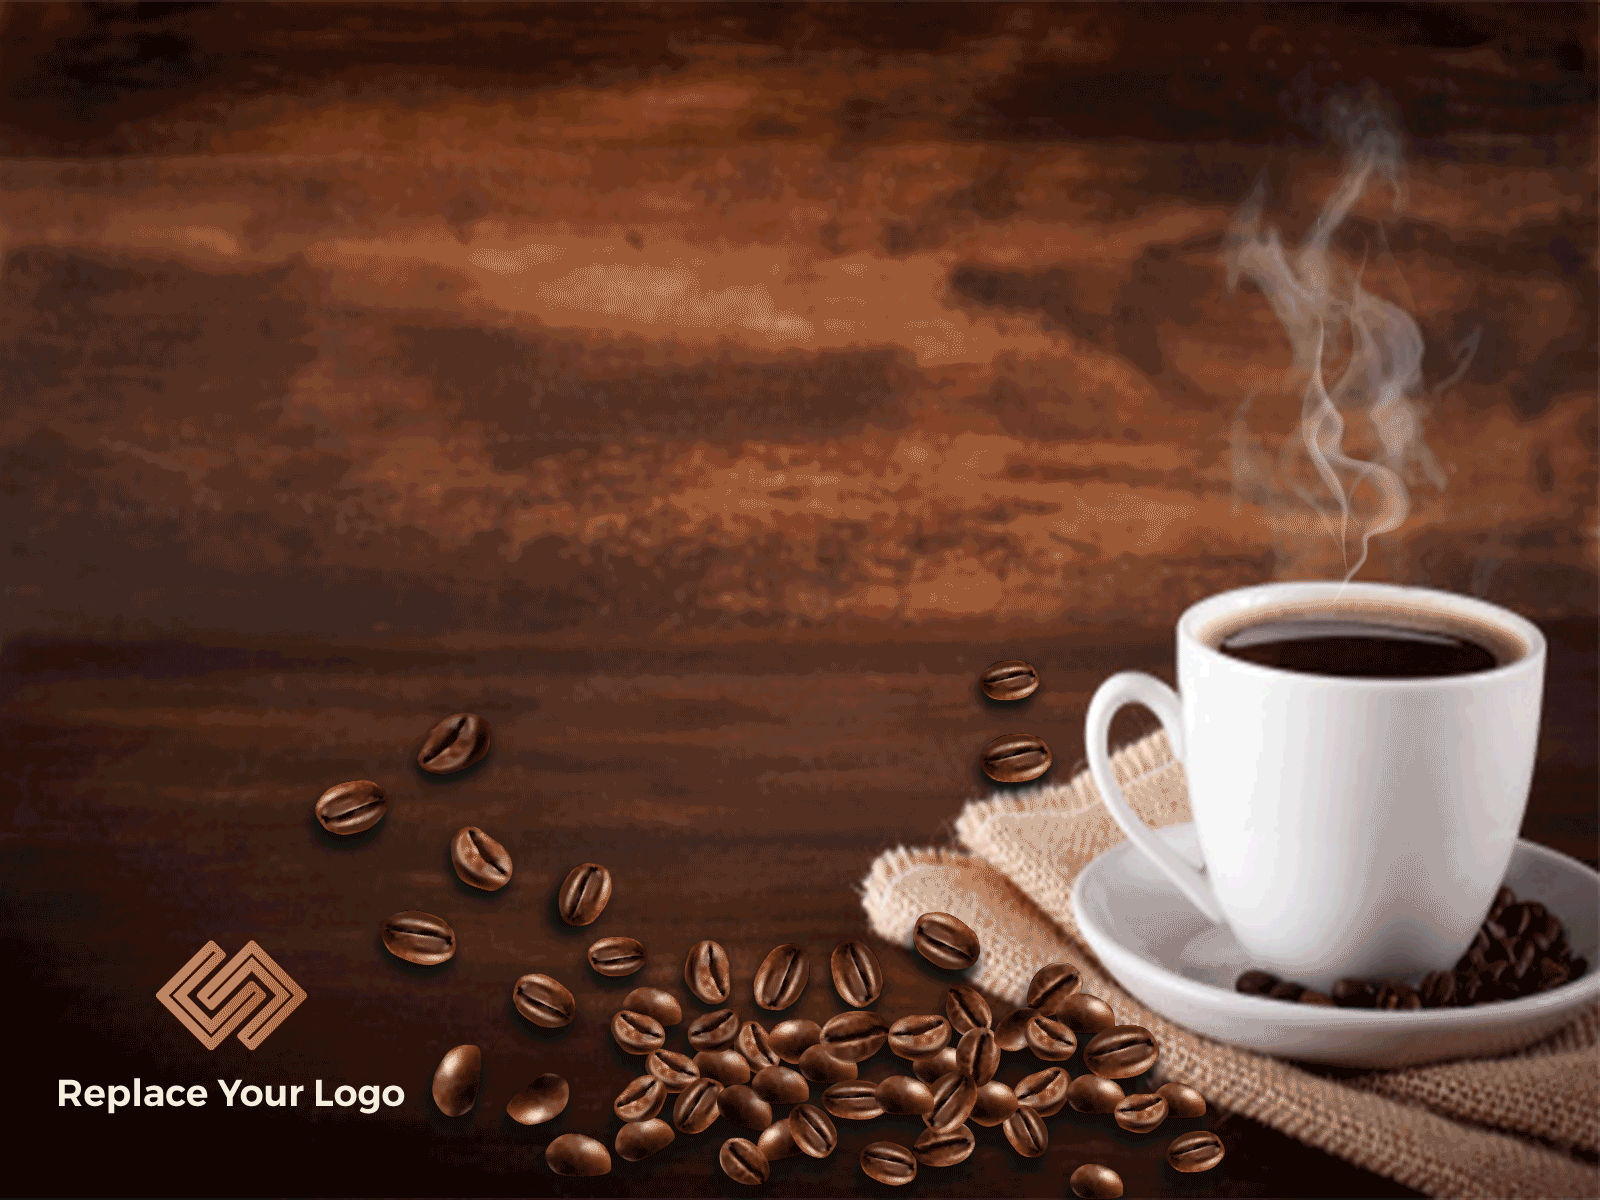 Free Animated Coffee Beans With Steam For Social Media Designs coffee free photoshop psd social media